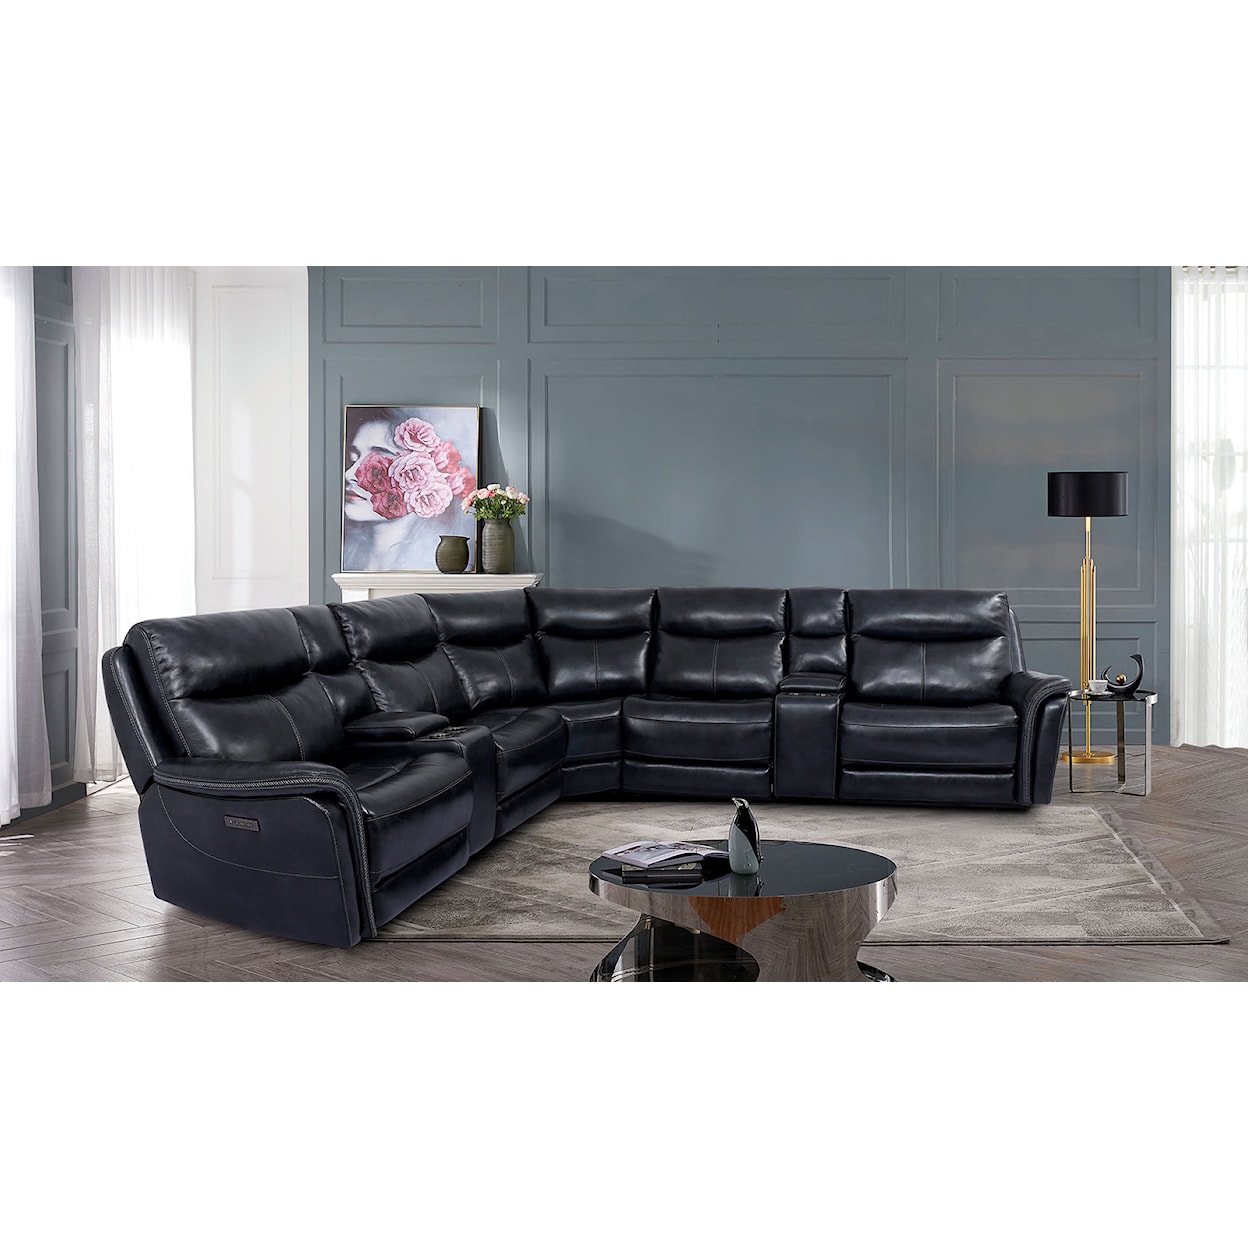 Furniture of America Braylee Power Sectional